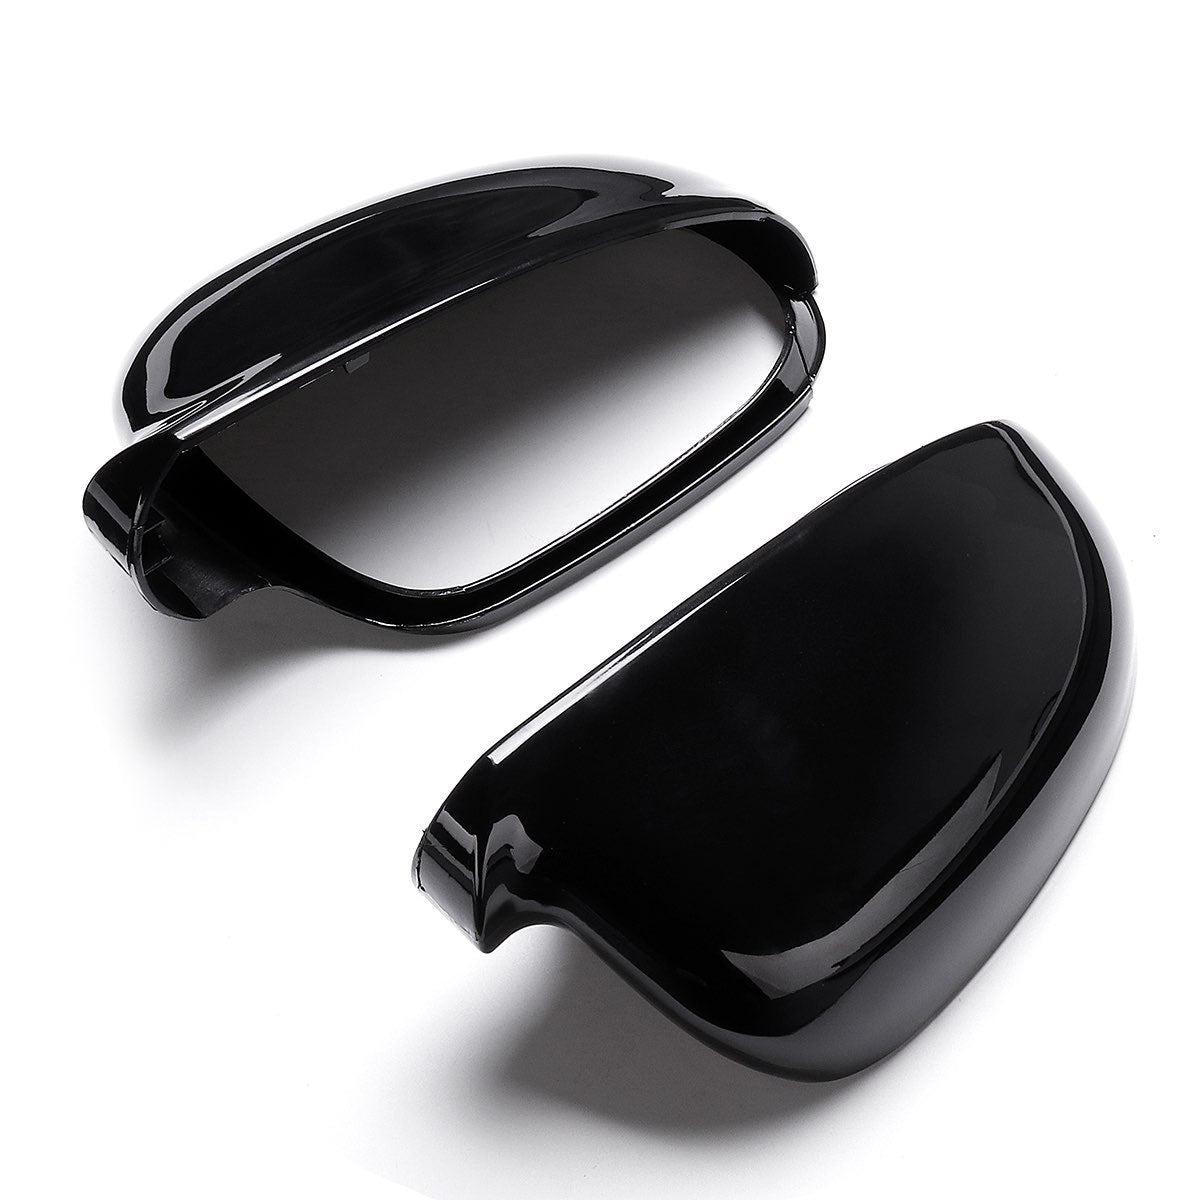 Left Black Rearview Wing Mirror Cover Casing Suit For Volkswagen Suit For VW Jetta Golf MK5